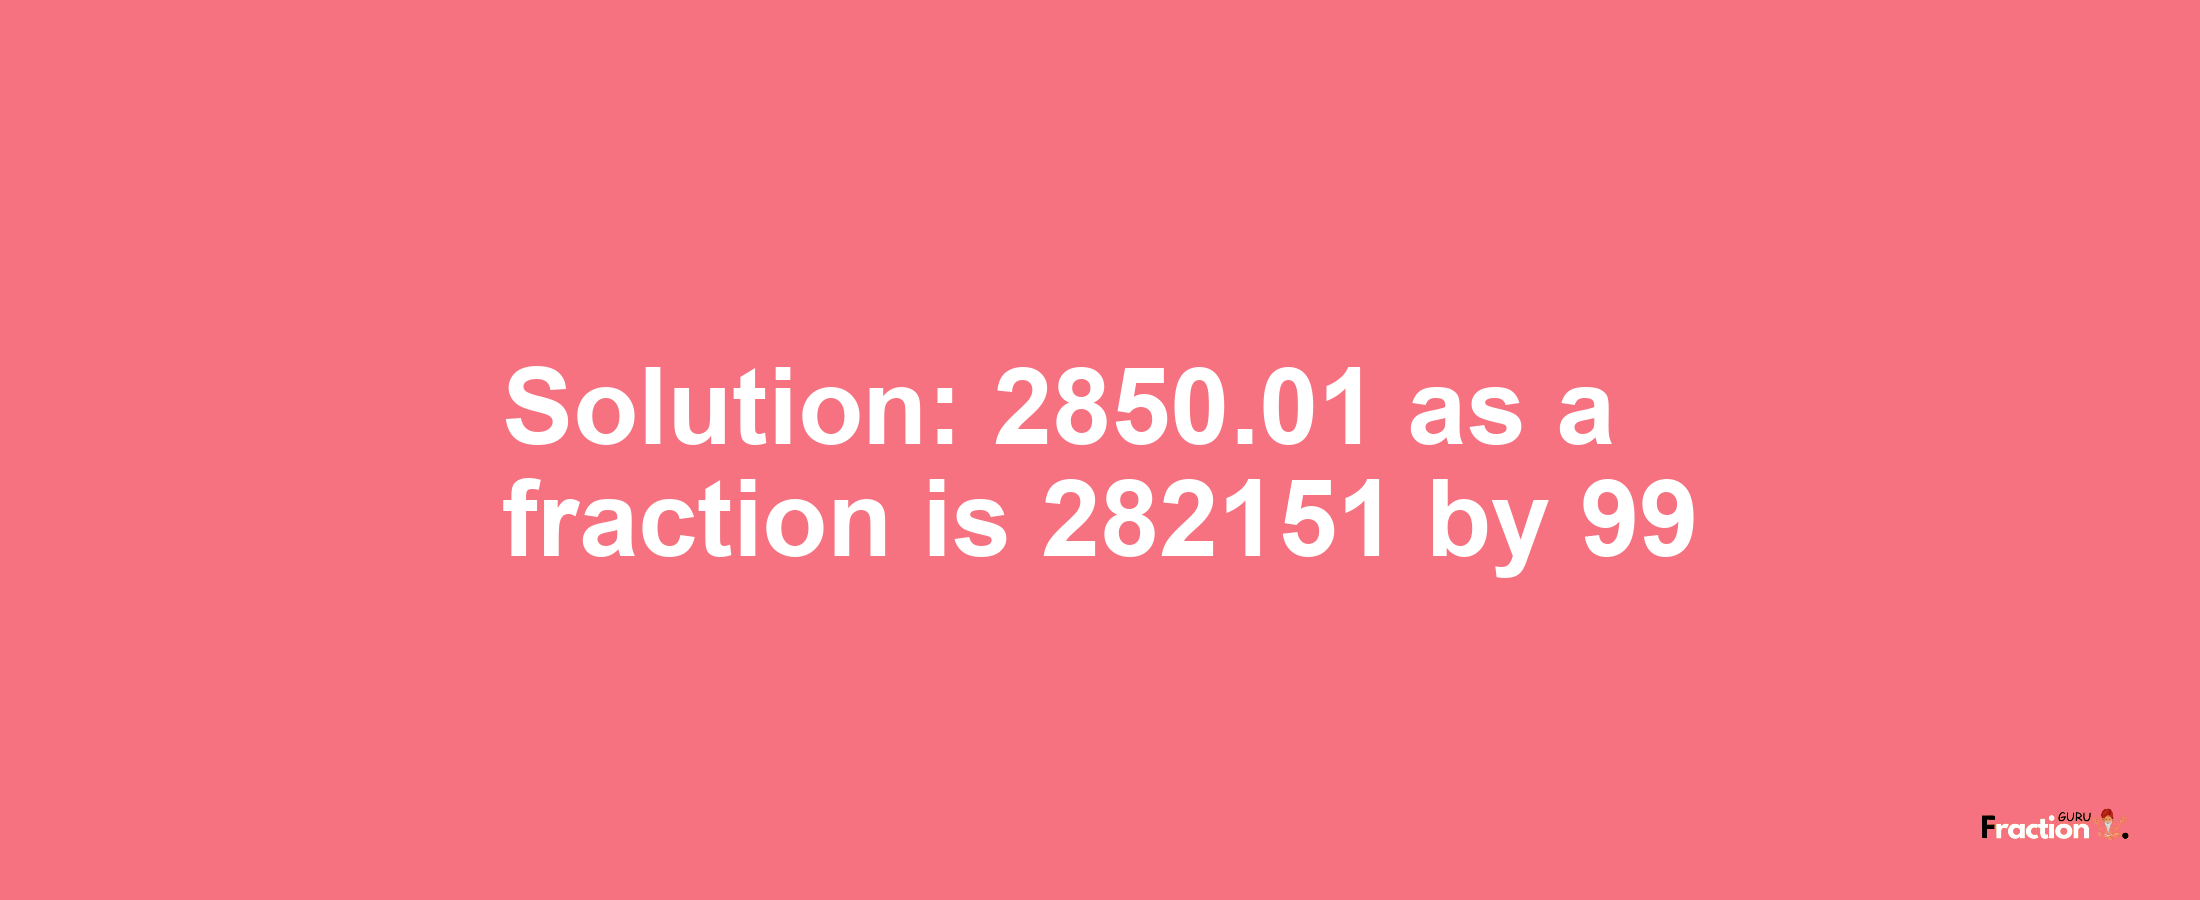 Solution:2850.01 as a fraction is 282151/99